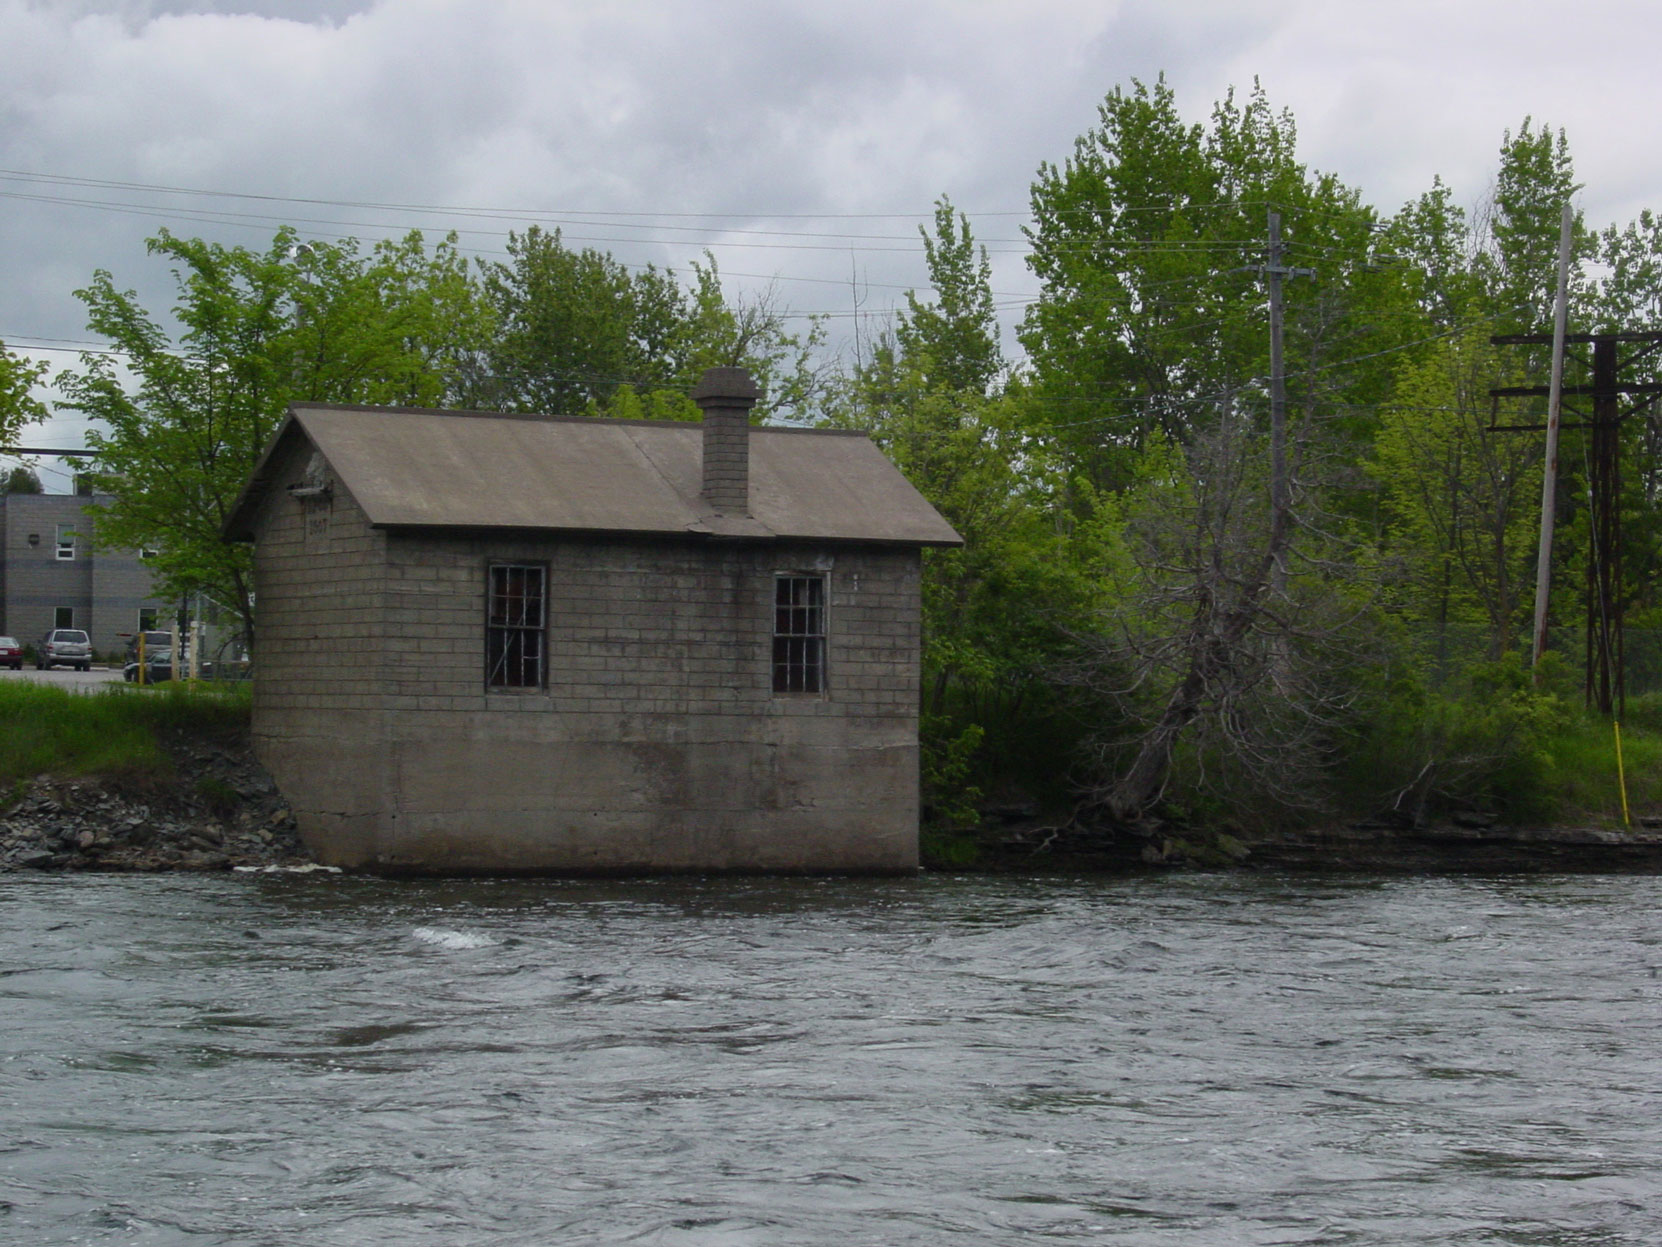 The Lakefield Portland Cement Company pumphouse, built in 1907, on the Otanabee River in Lakefield, Ontario (photo by Author)